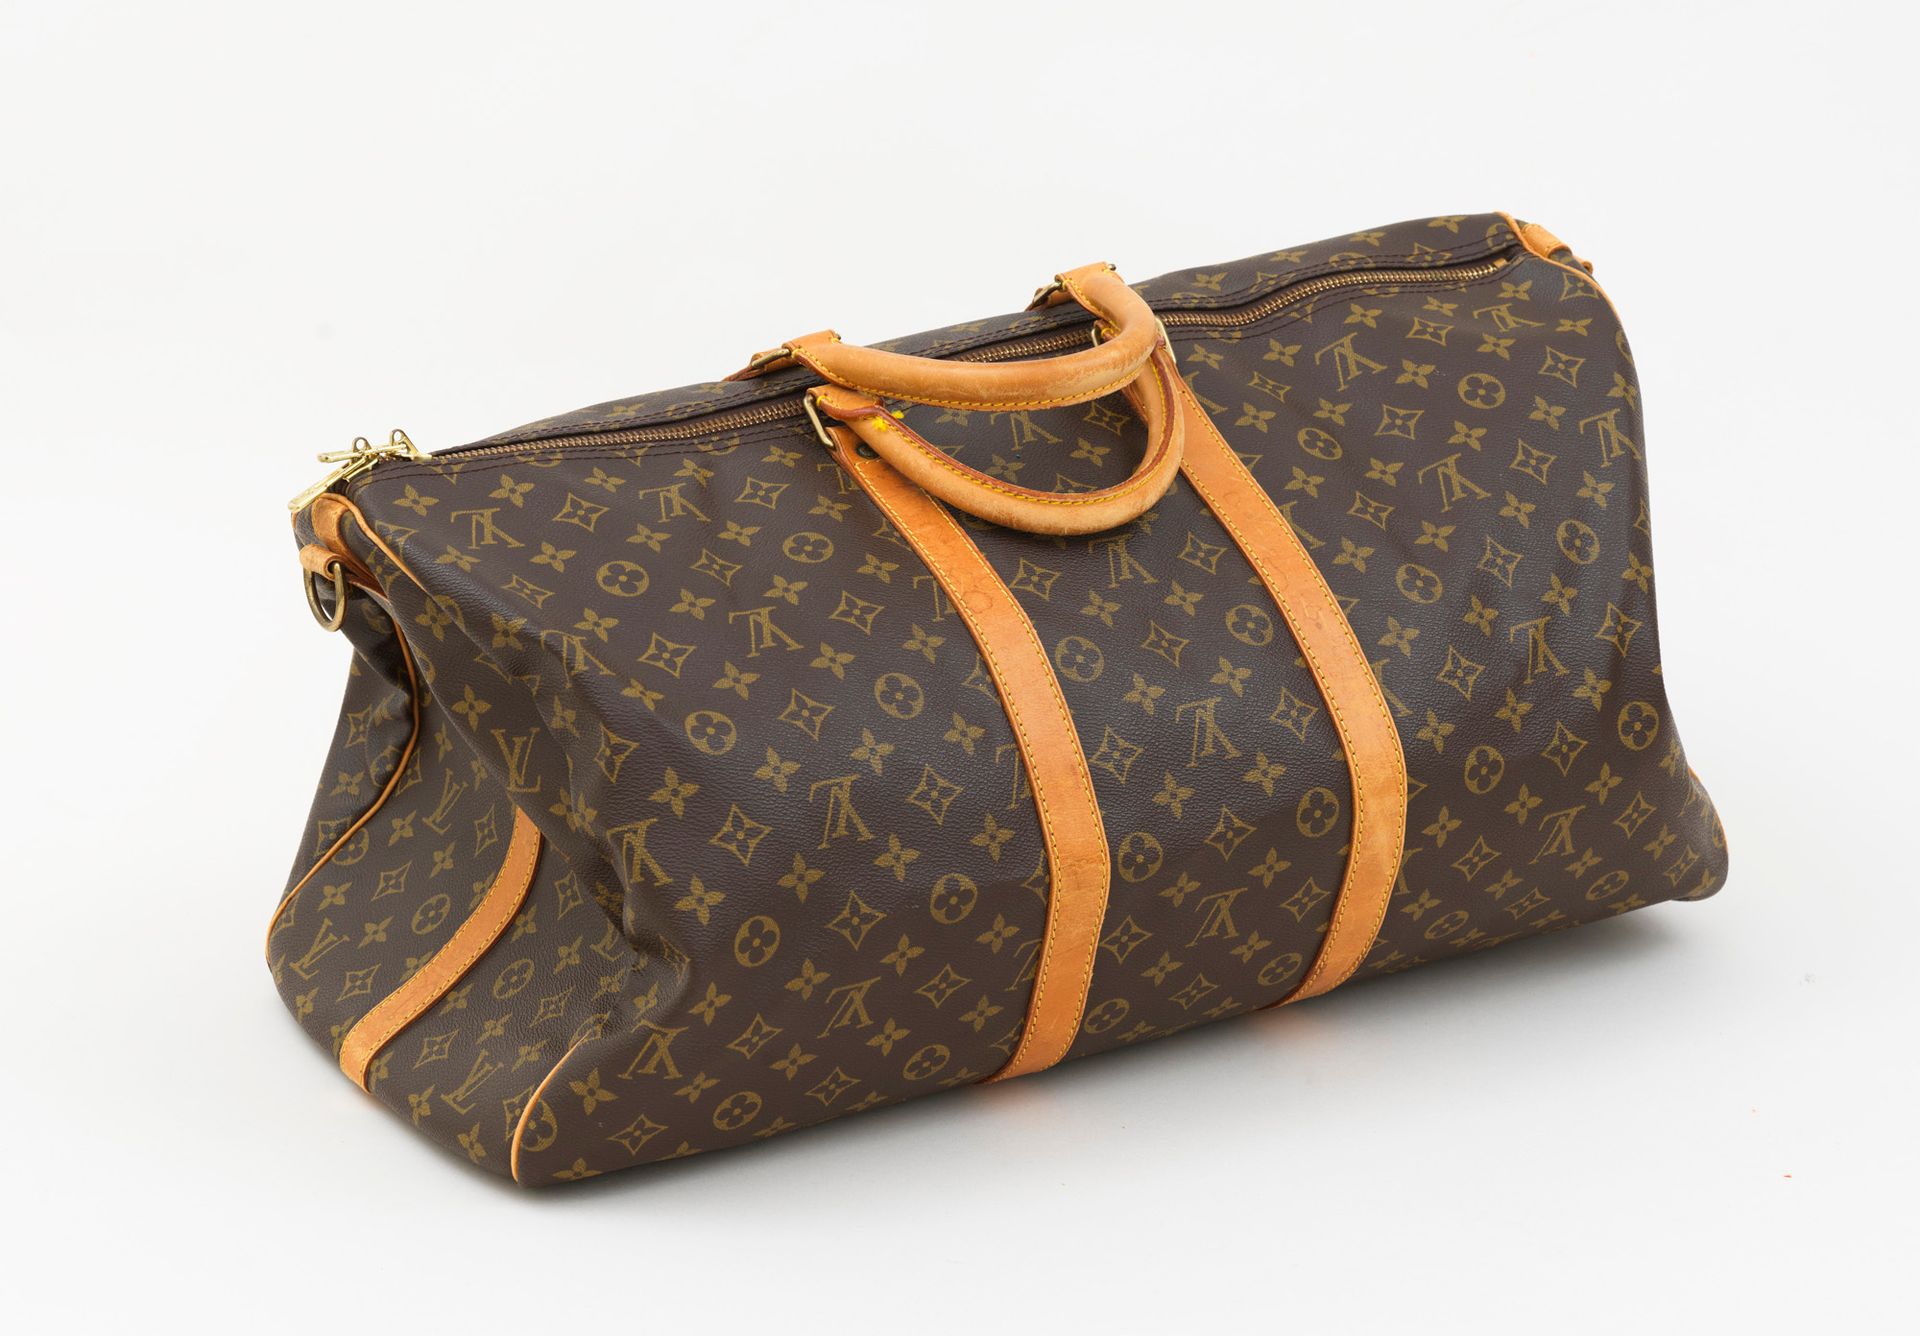 LOUIS VUITTON - Keepall 75 bag in monogram canvas and na…